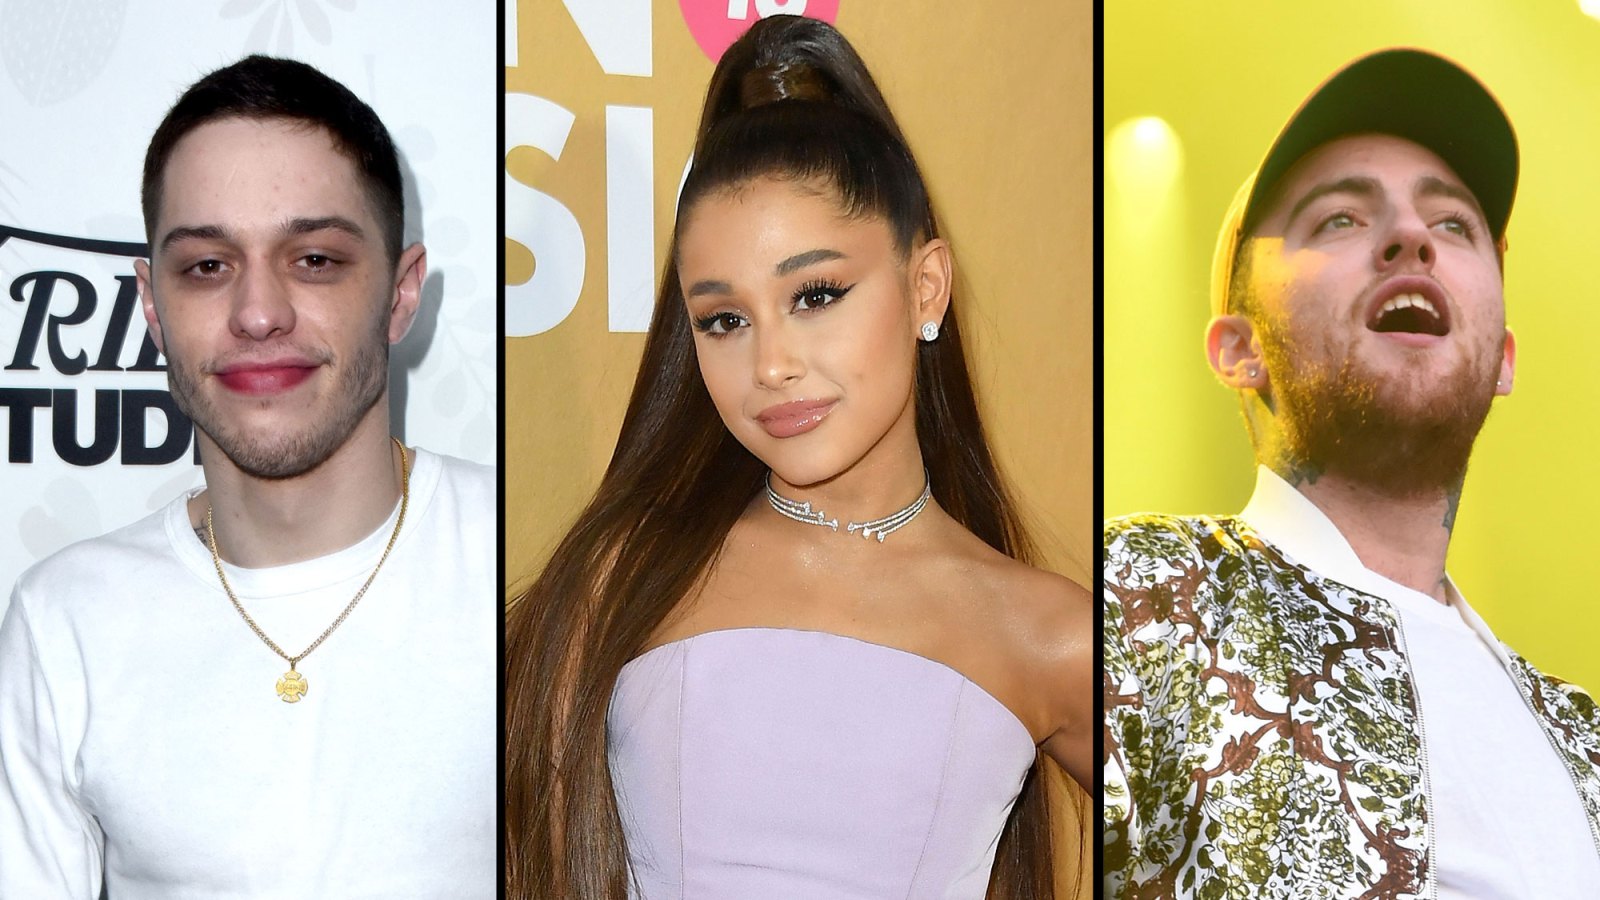 Fans Think Ariana Grande's New Video 'Ghostin' Is About Exes Pete Davidson and Mac Miller